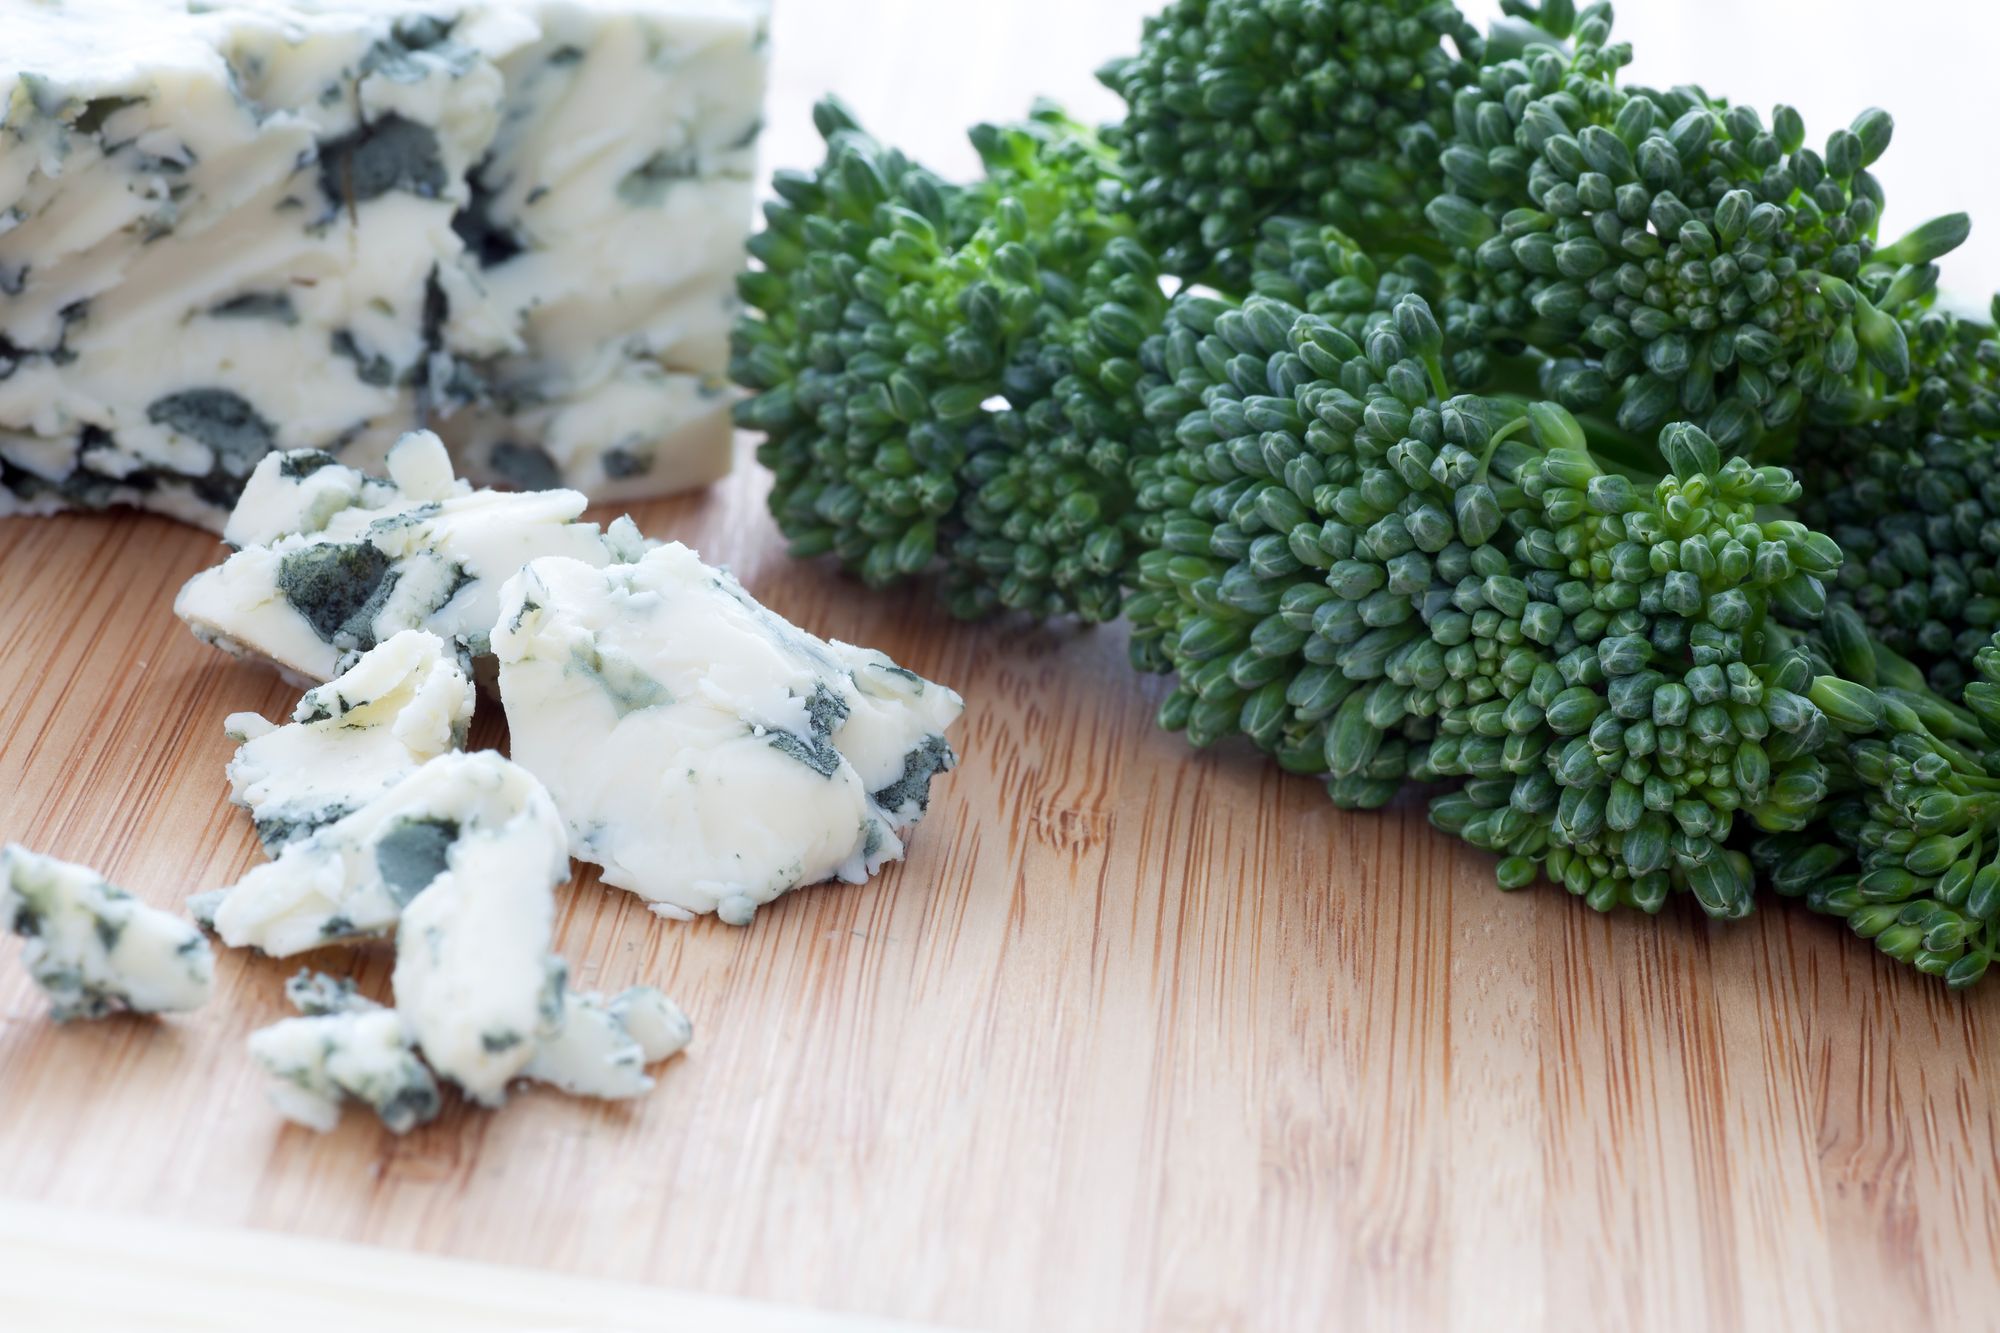 Purple Sprouting Broccoli with Mushrooms and Stilton